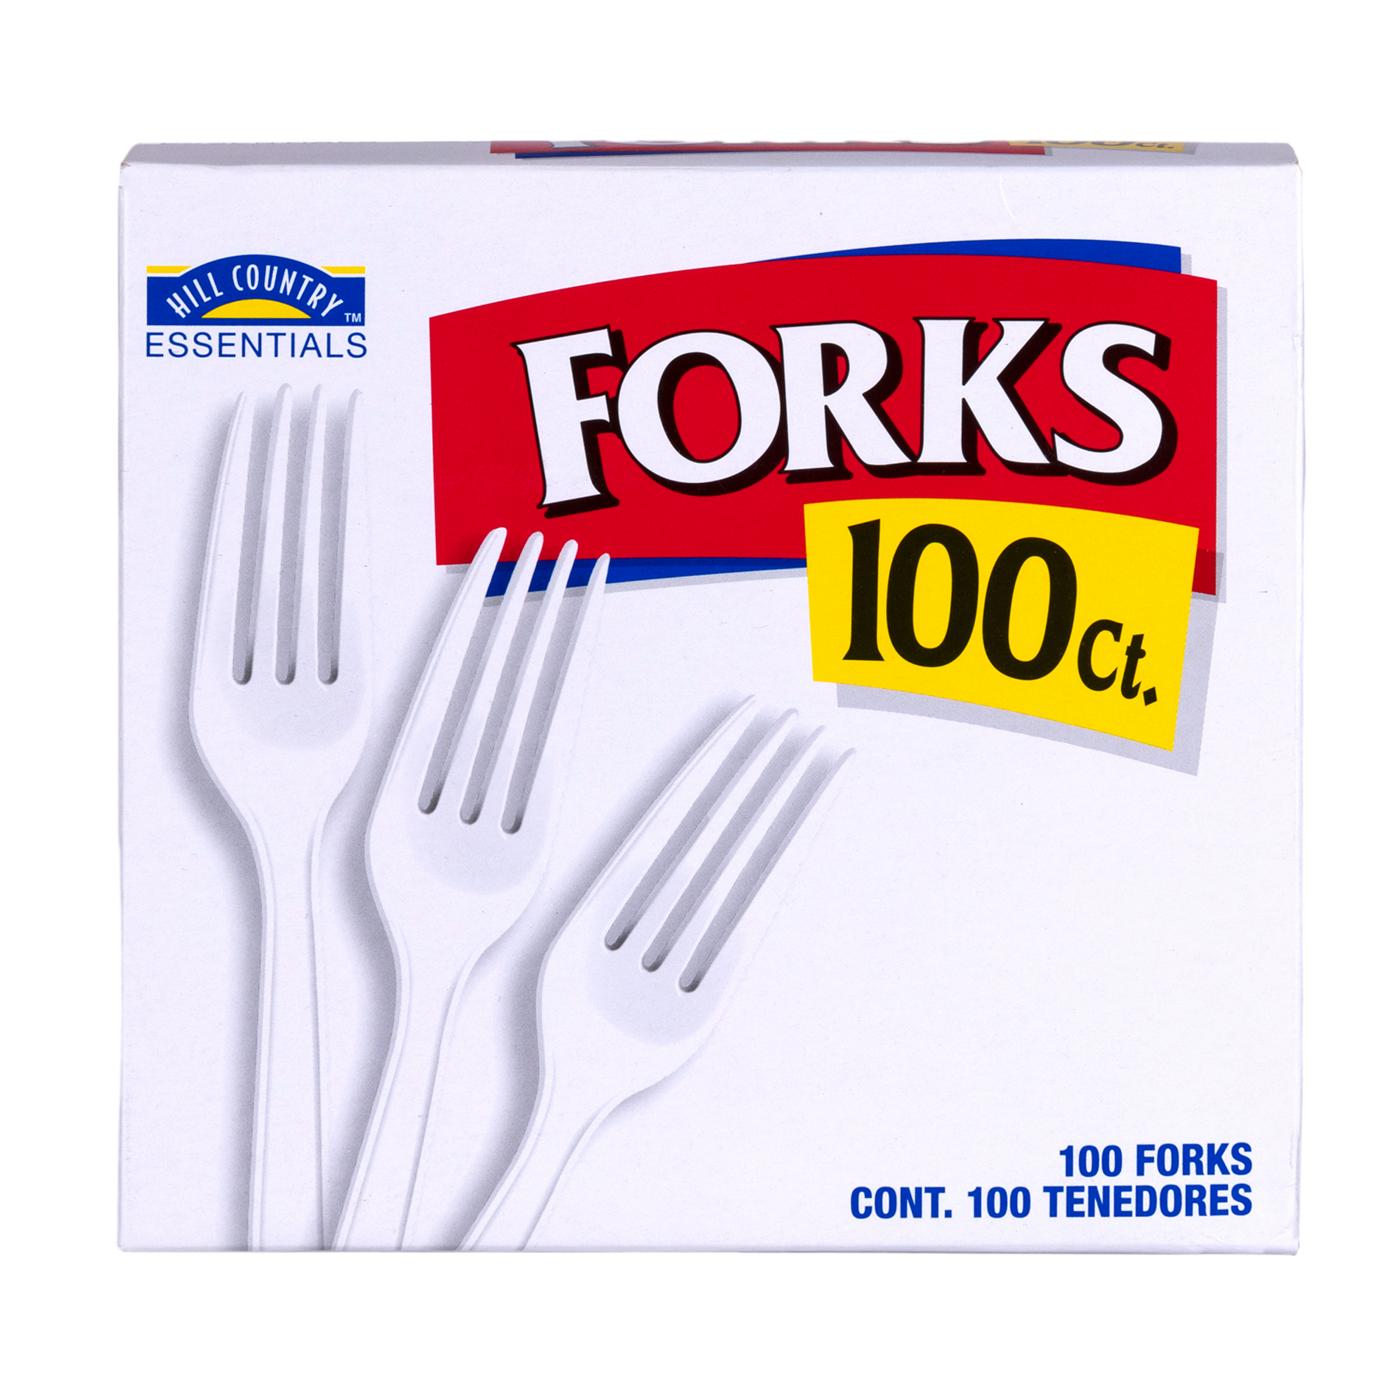 Hill Country Essentials Plastic Forks - White; image 1 of 3